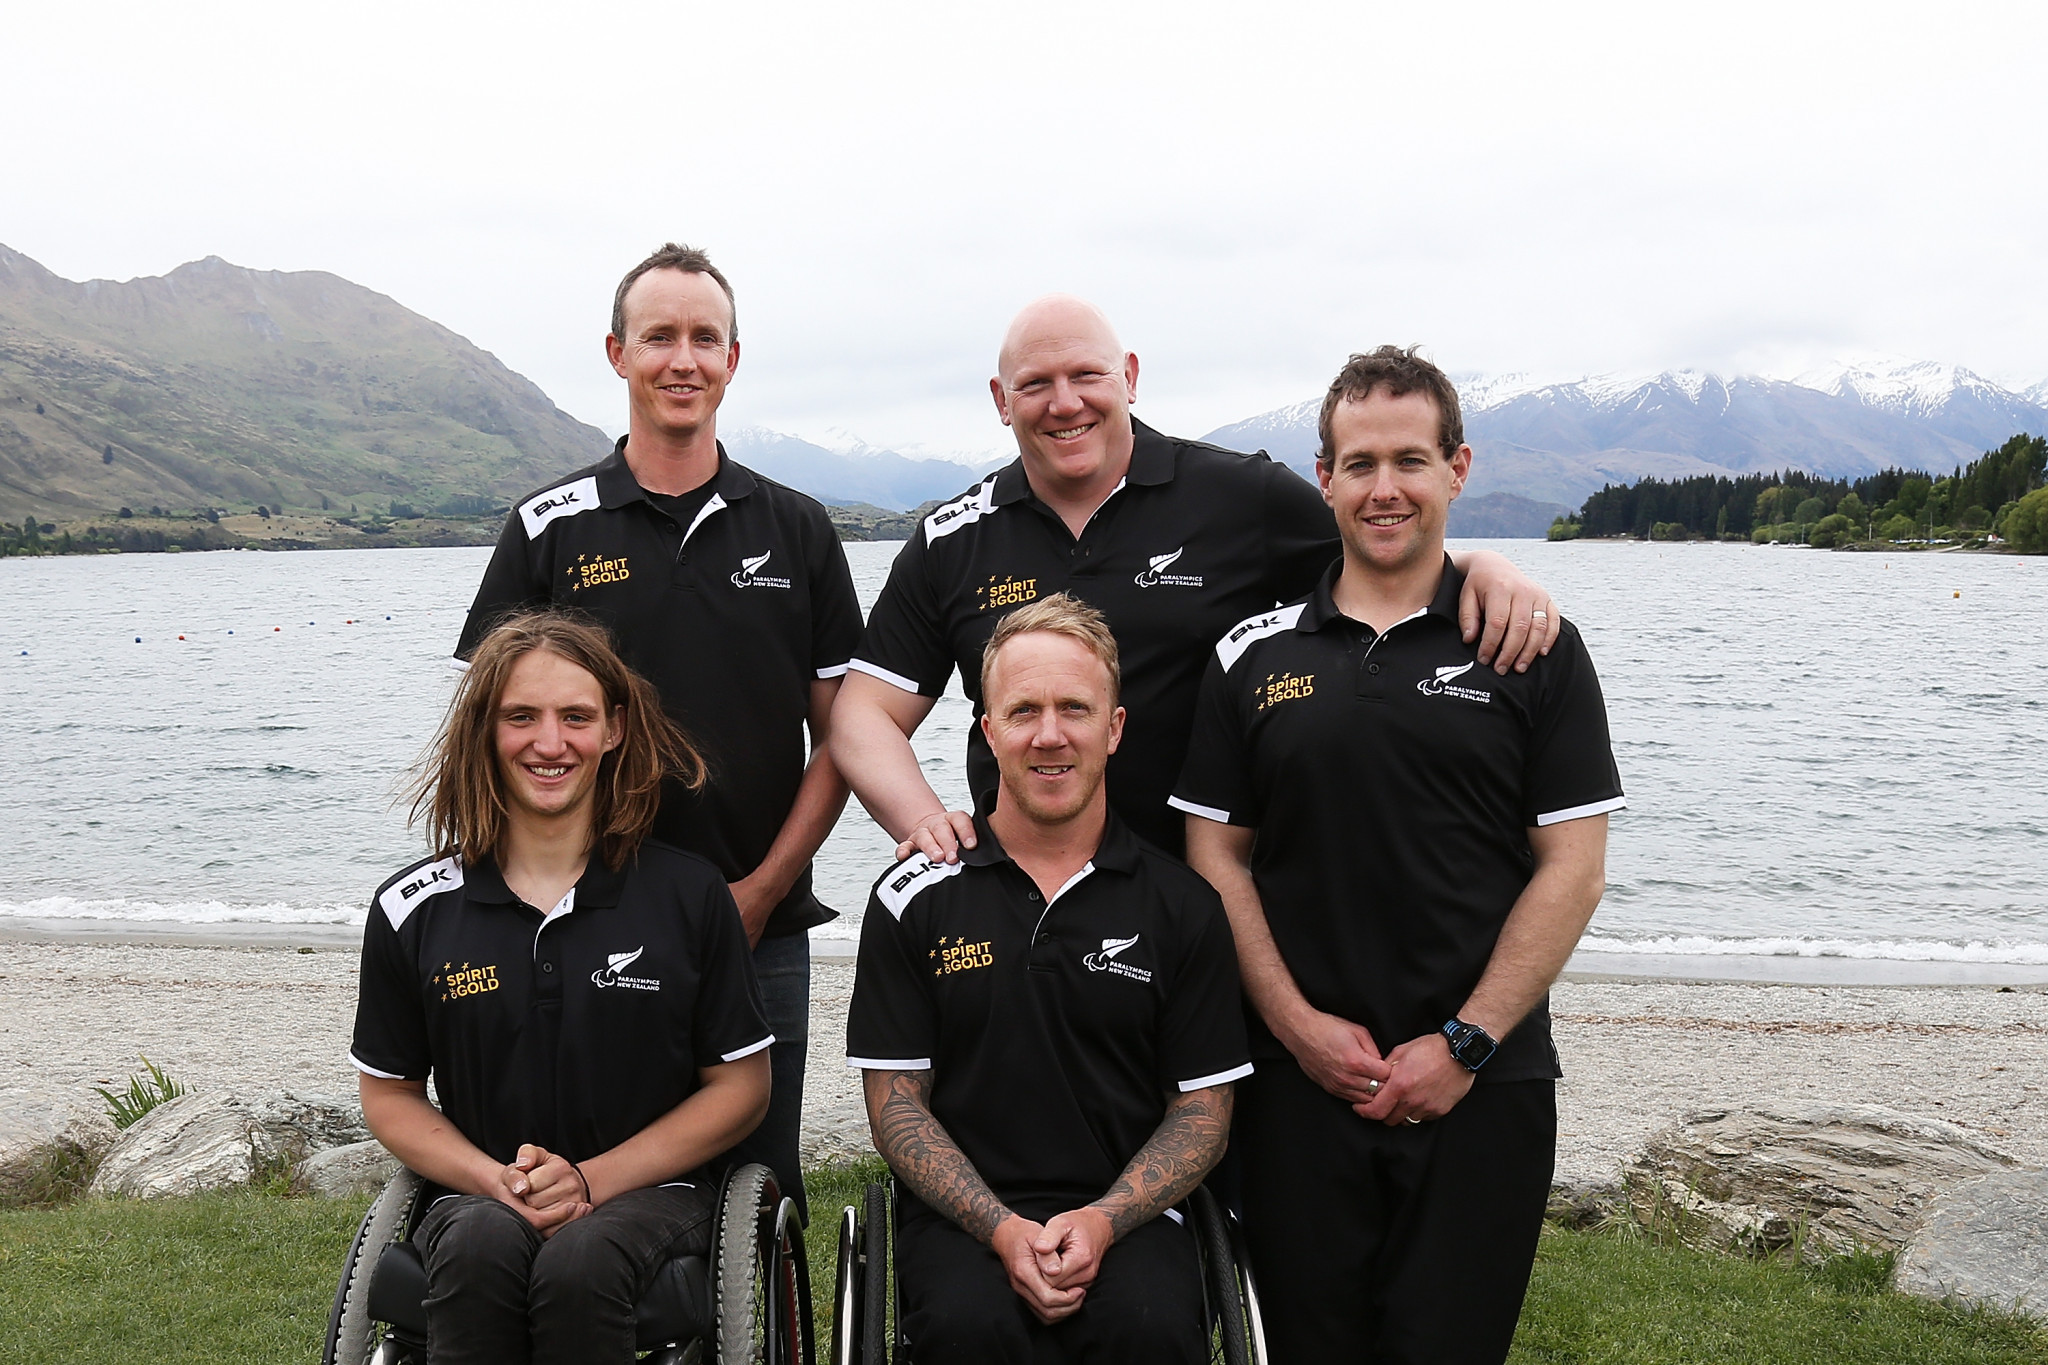 New Zealand's team for the Pyeongchang 2018 Paralympics, pictured with their Chef De Mission, will receive letters of support from their Minister for Disability Issues   ©Getty Images